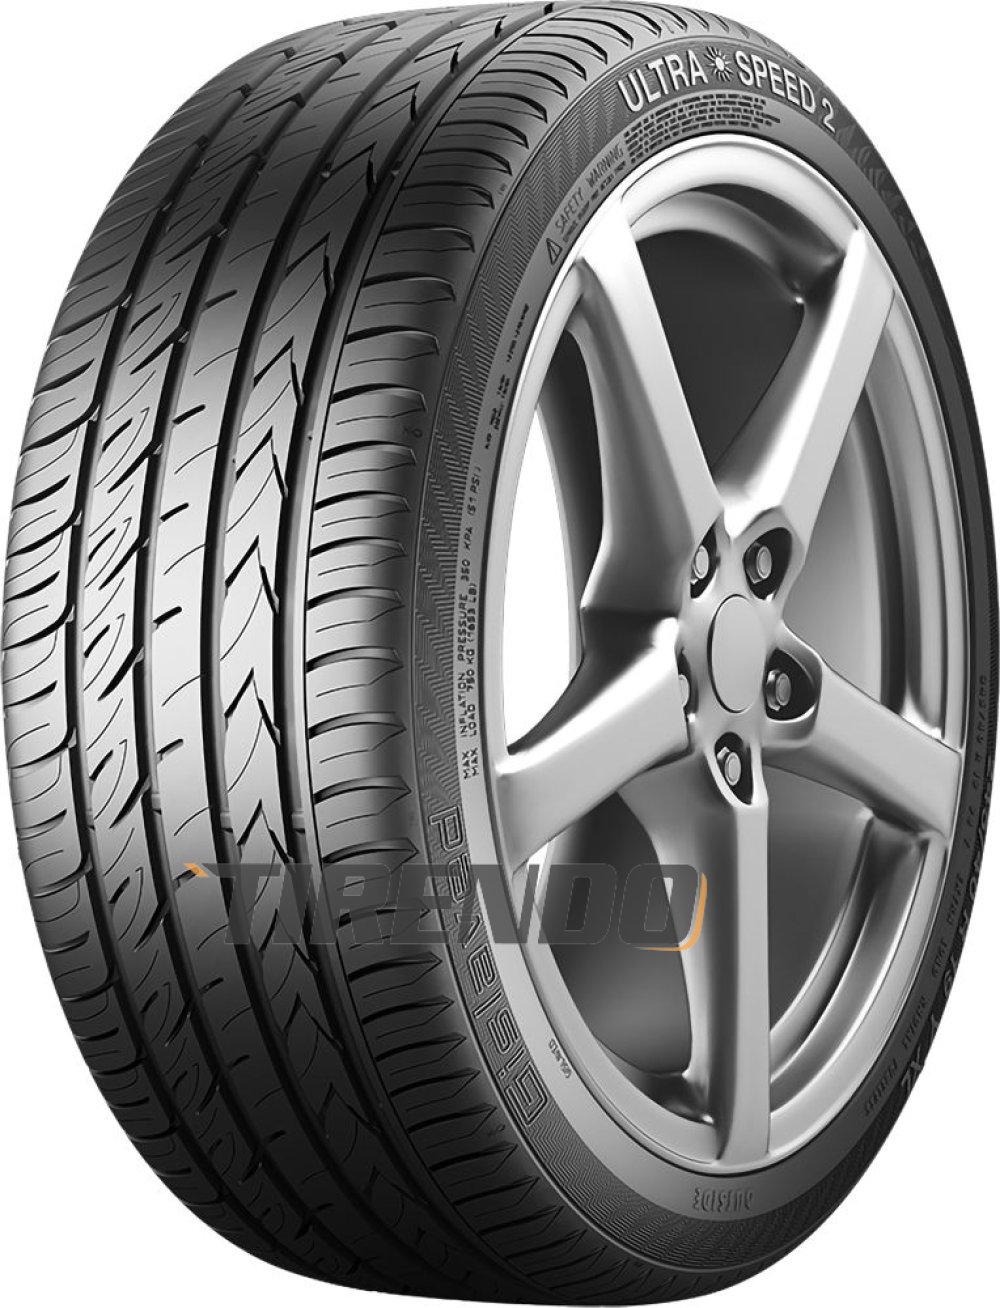 Image of Gislaved Ultra*Speed 2 ( 205/60 R16 92H EVc )